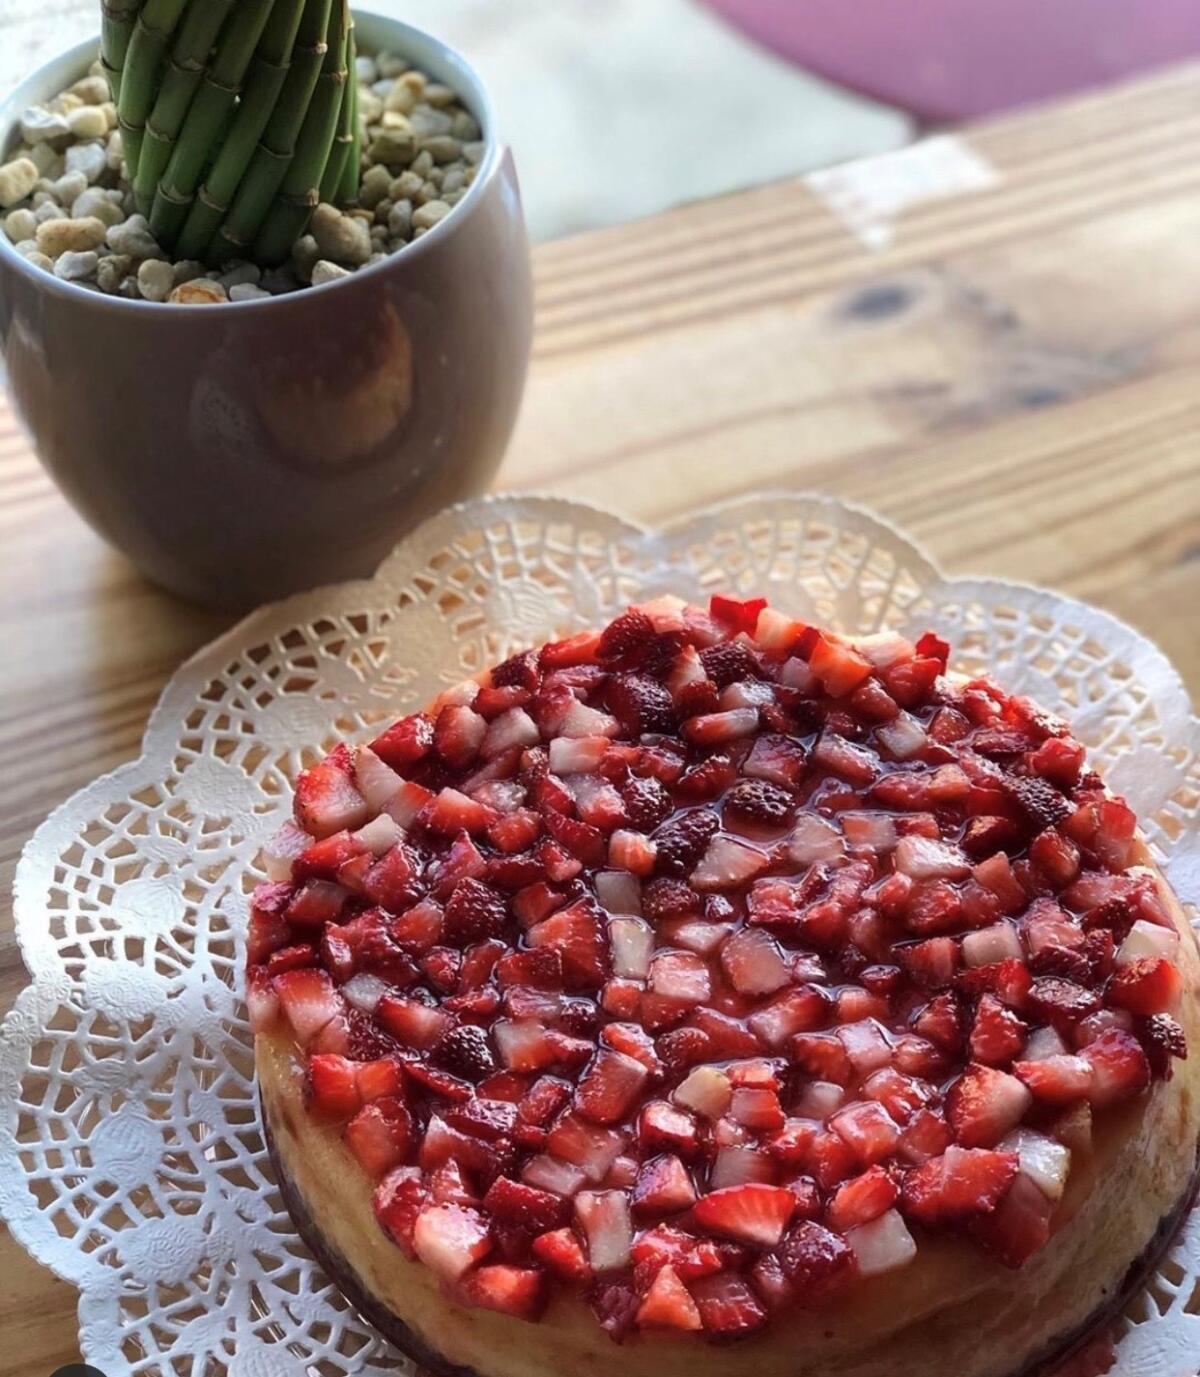 A strawberry tart at newly opened Monti's Munchies in Hillcrest.